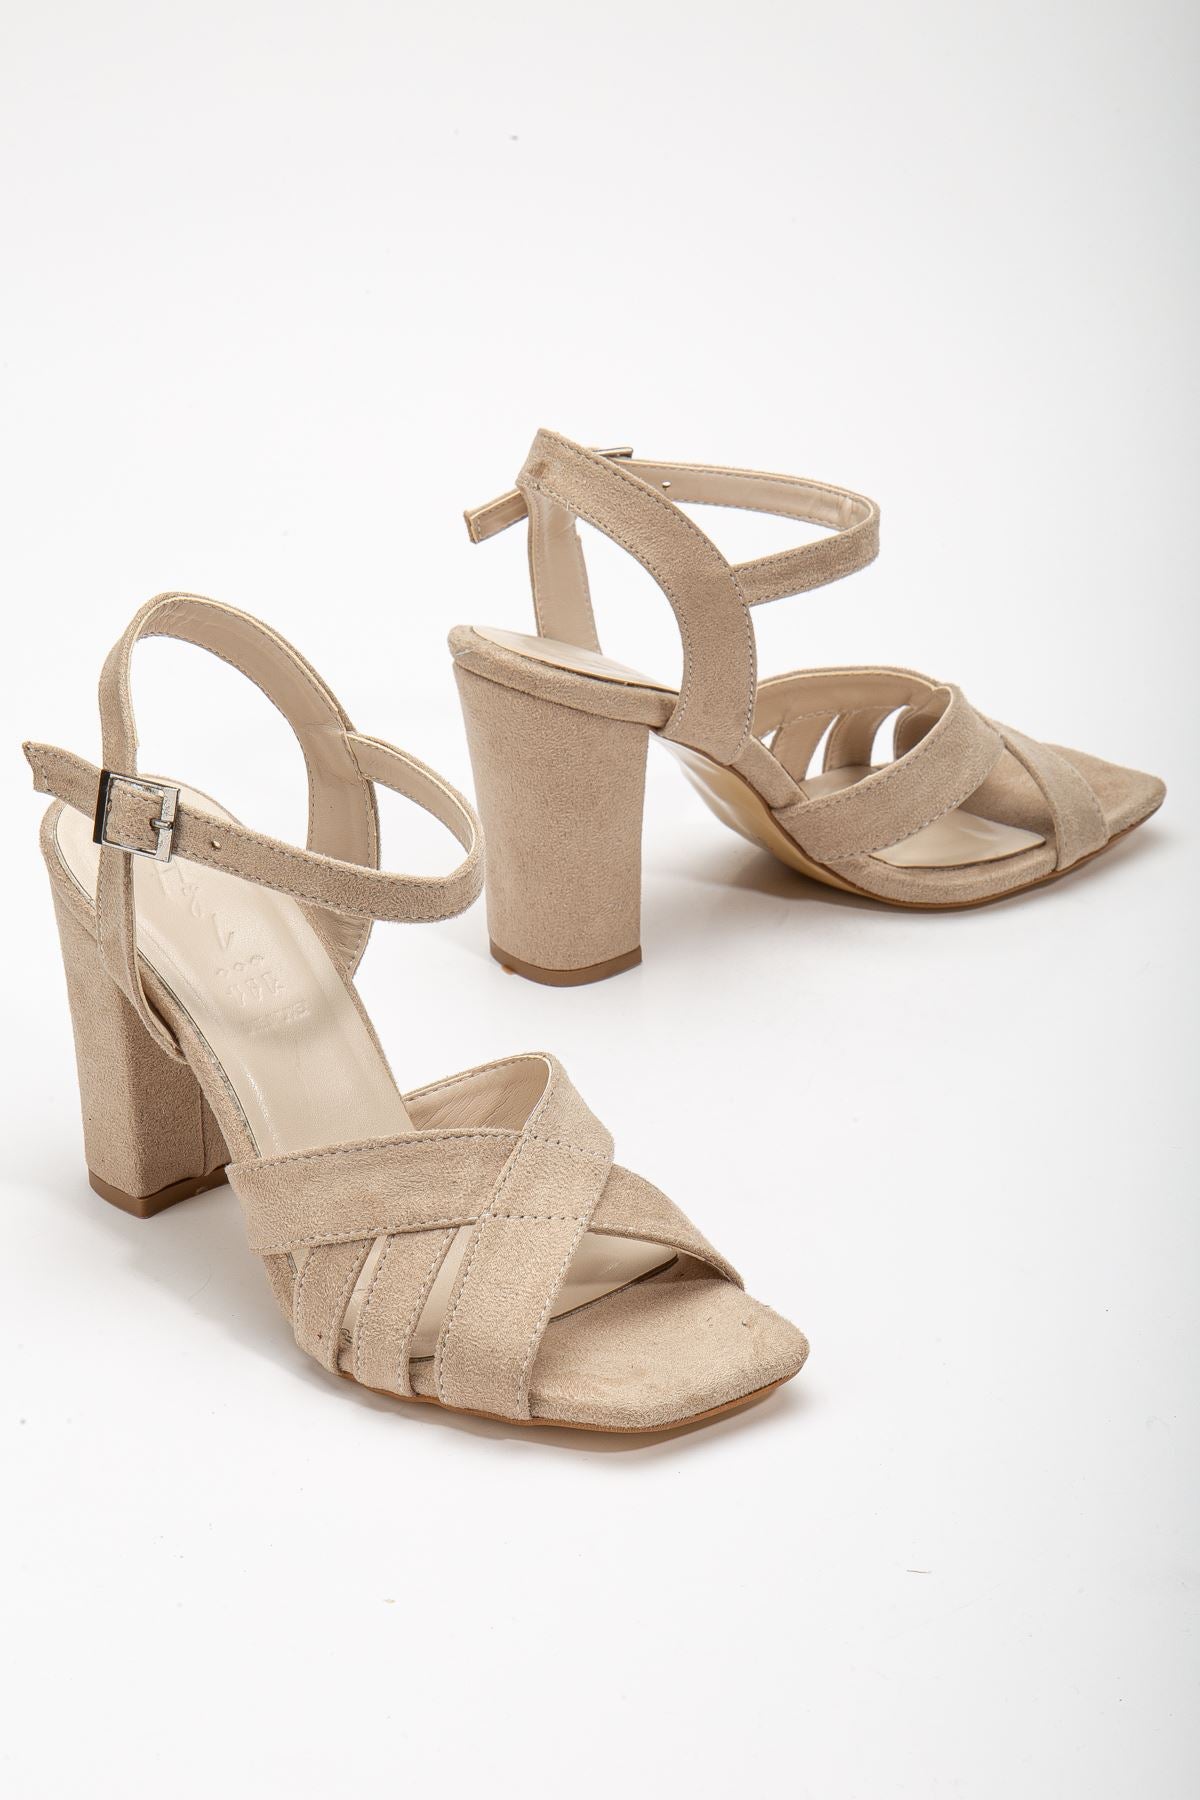 Hope High Heeled Cream Suede Blunt Toe Women's Shoes - STREETMODE™